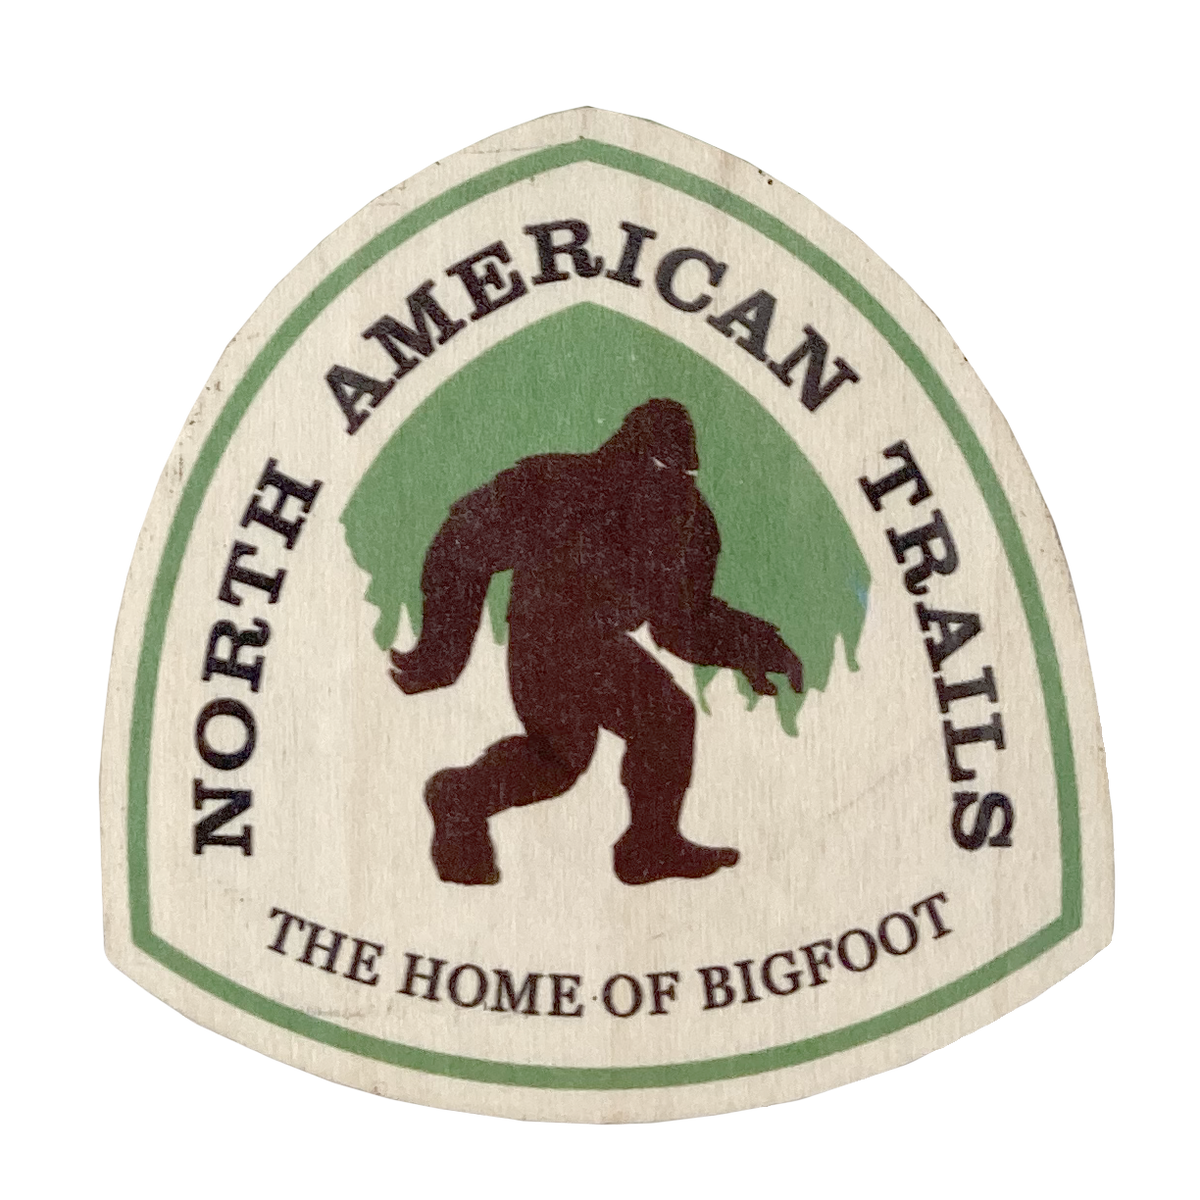 The Great Outdoors Home of Bigfoot Badge Wooden Decal